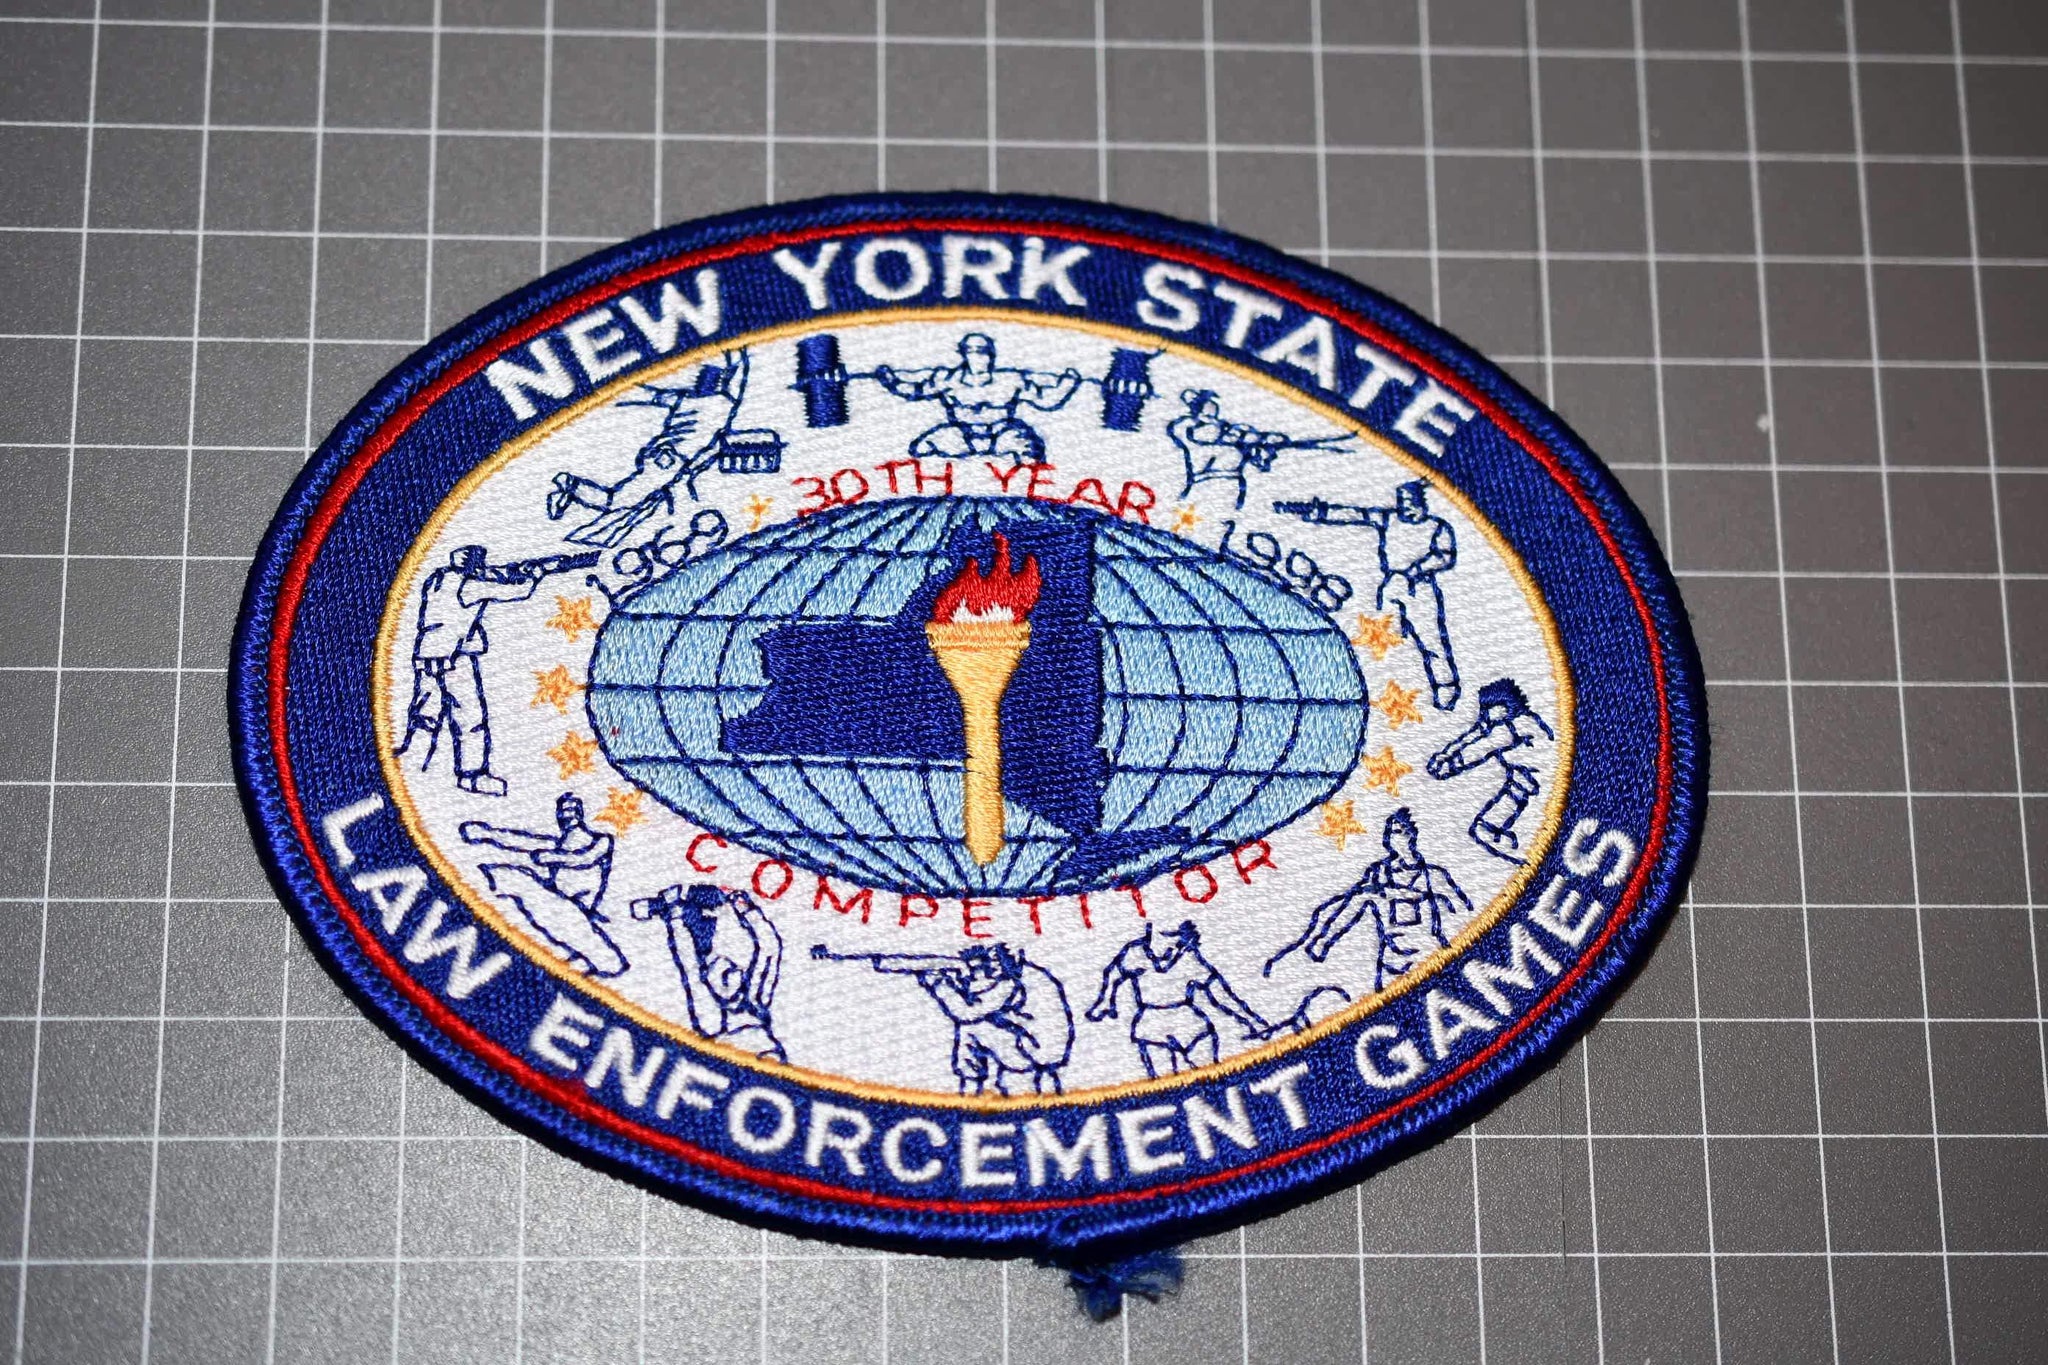 New York State Law Enforcement Games 30th Year Patch (B1)